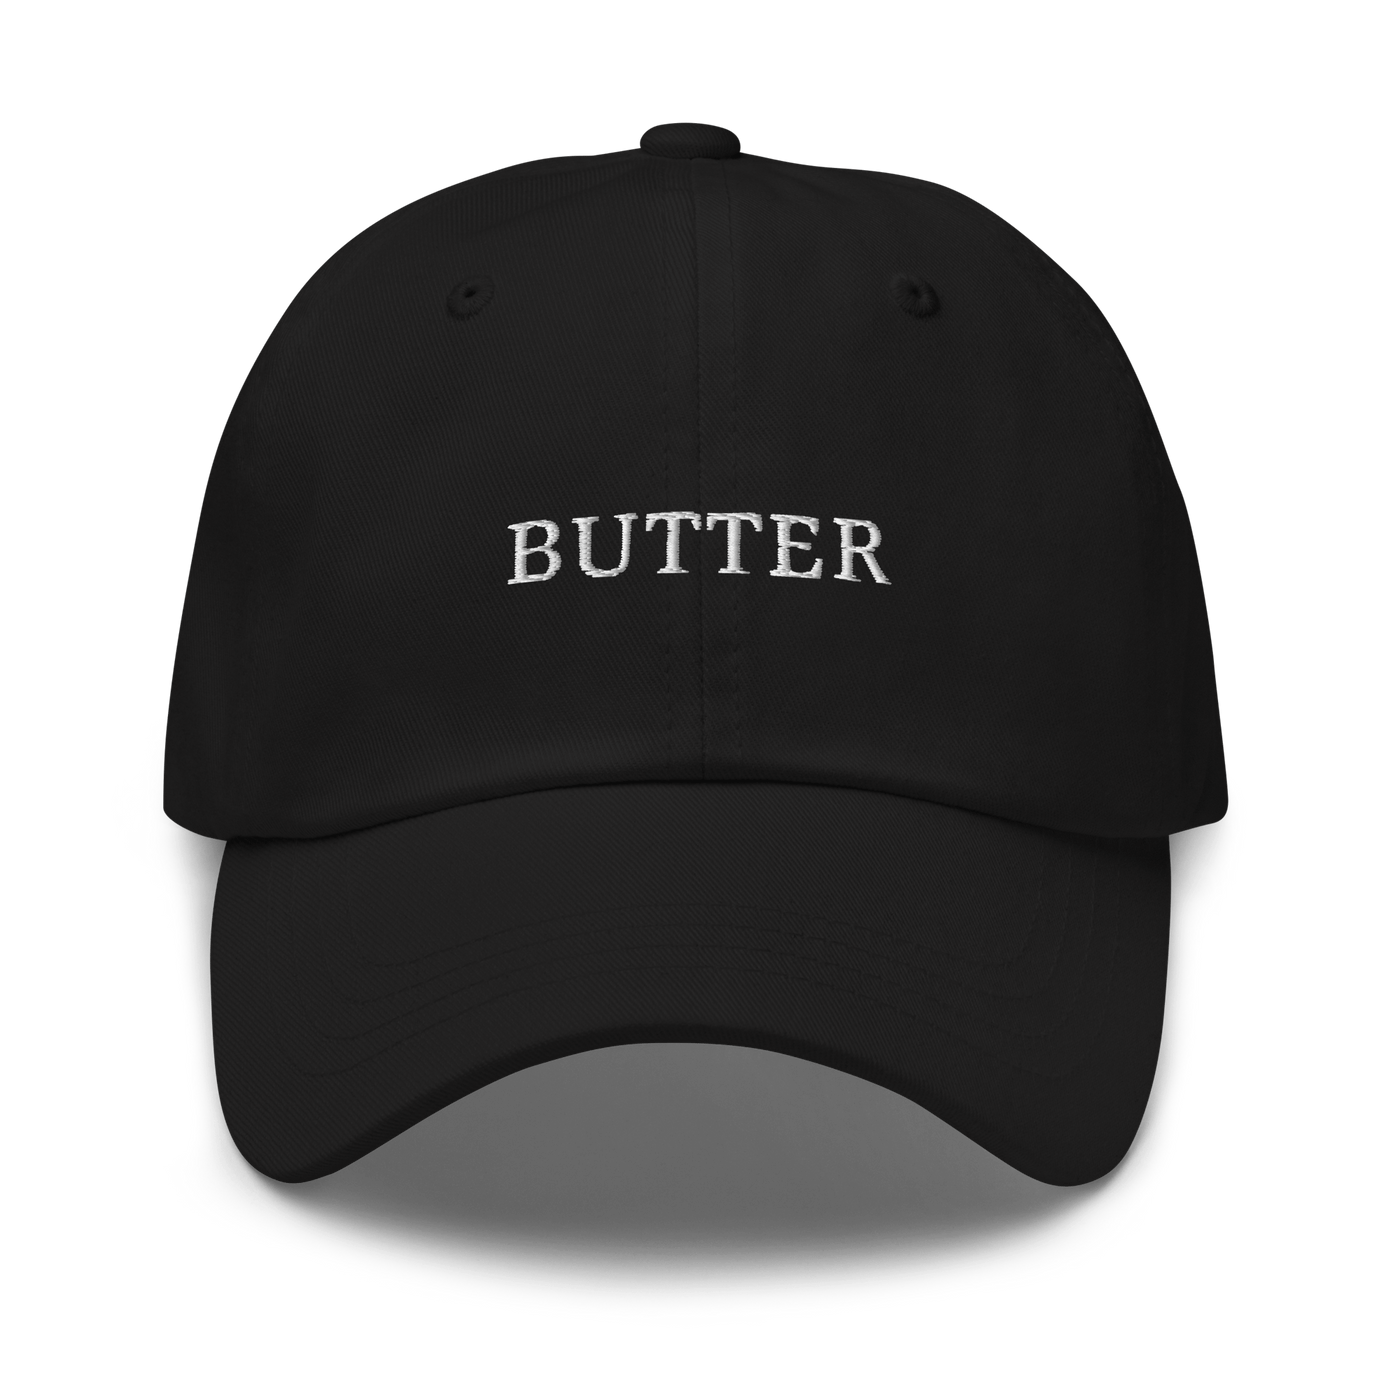 Butter Dad hat - Black - - Just Another Cap Store